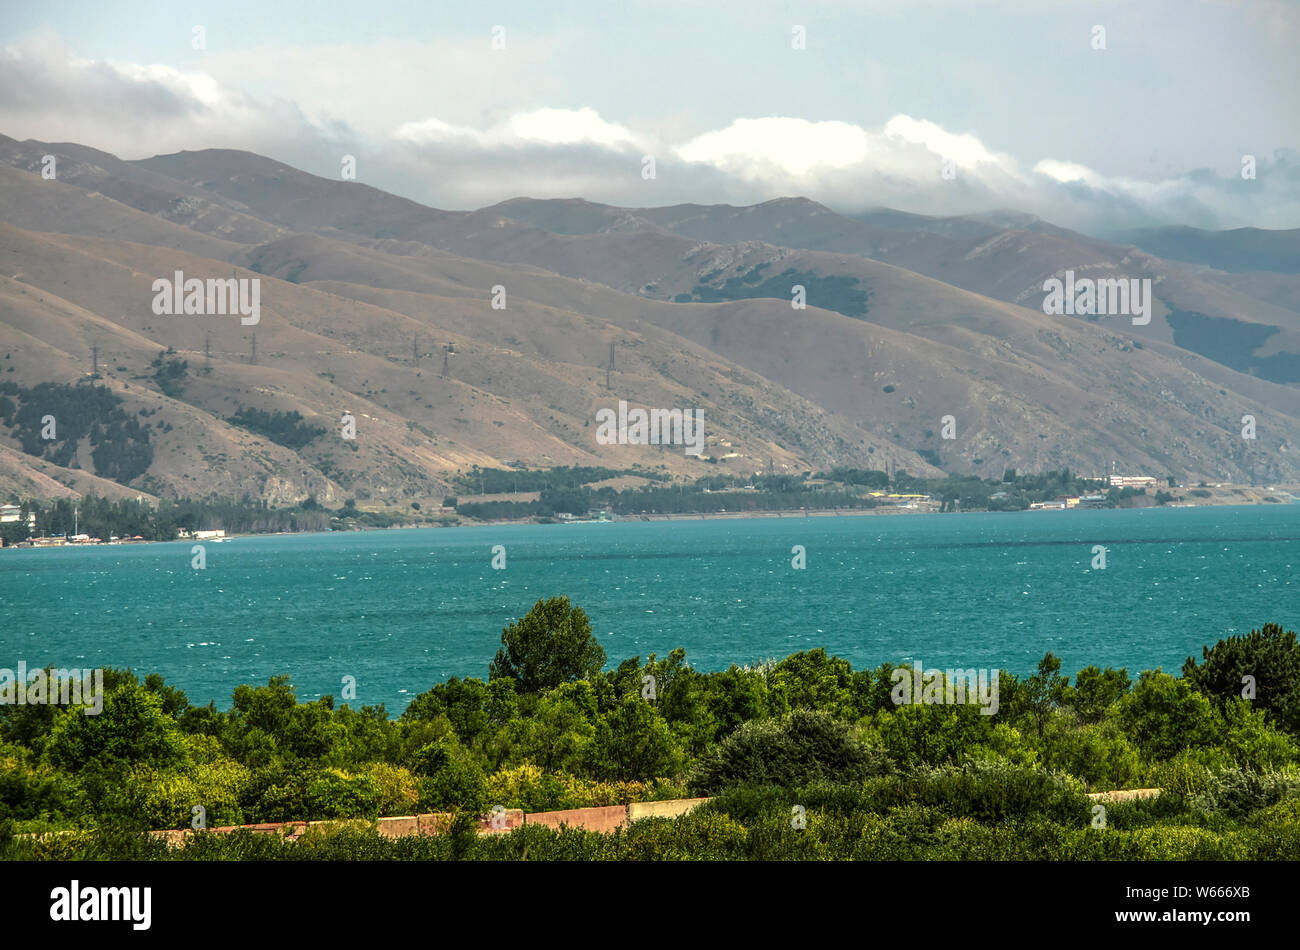 The shore of lake Sevan covered with trees and bushes surrounded by the mountains of Gegham ridge at an altitude of 1900 meters above sea level Stock Photo